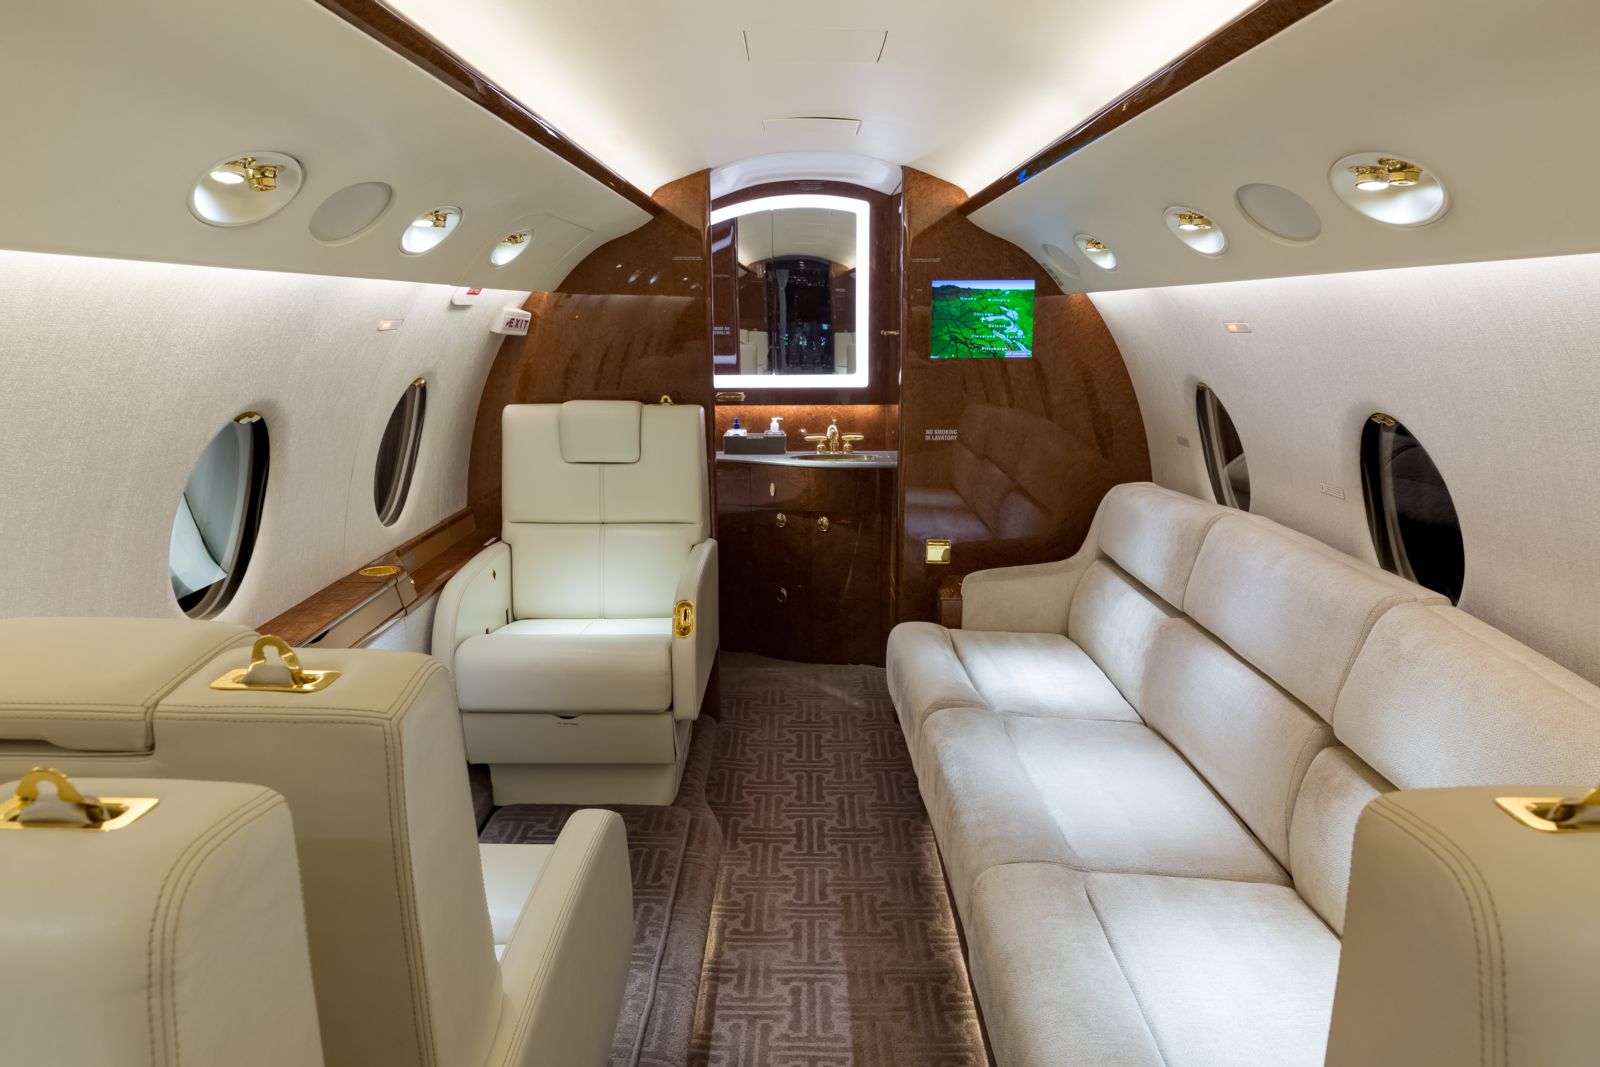 Gulfstream G200  S/N 170 for sale | gallery image: /userfiles/images/G200_sn170/bfp_8860.jpg